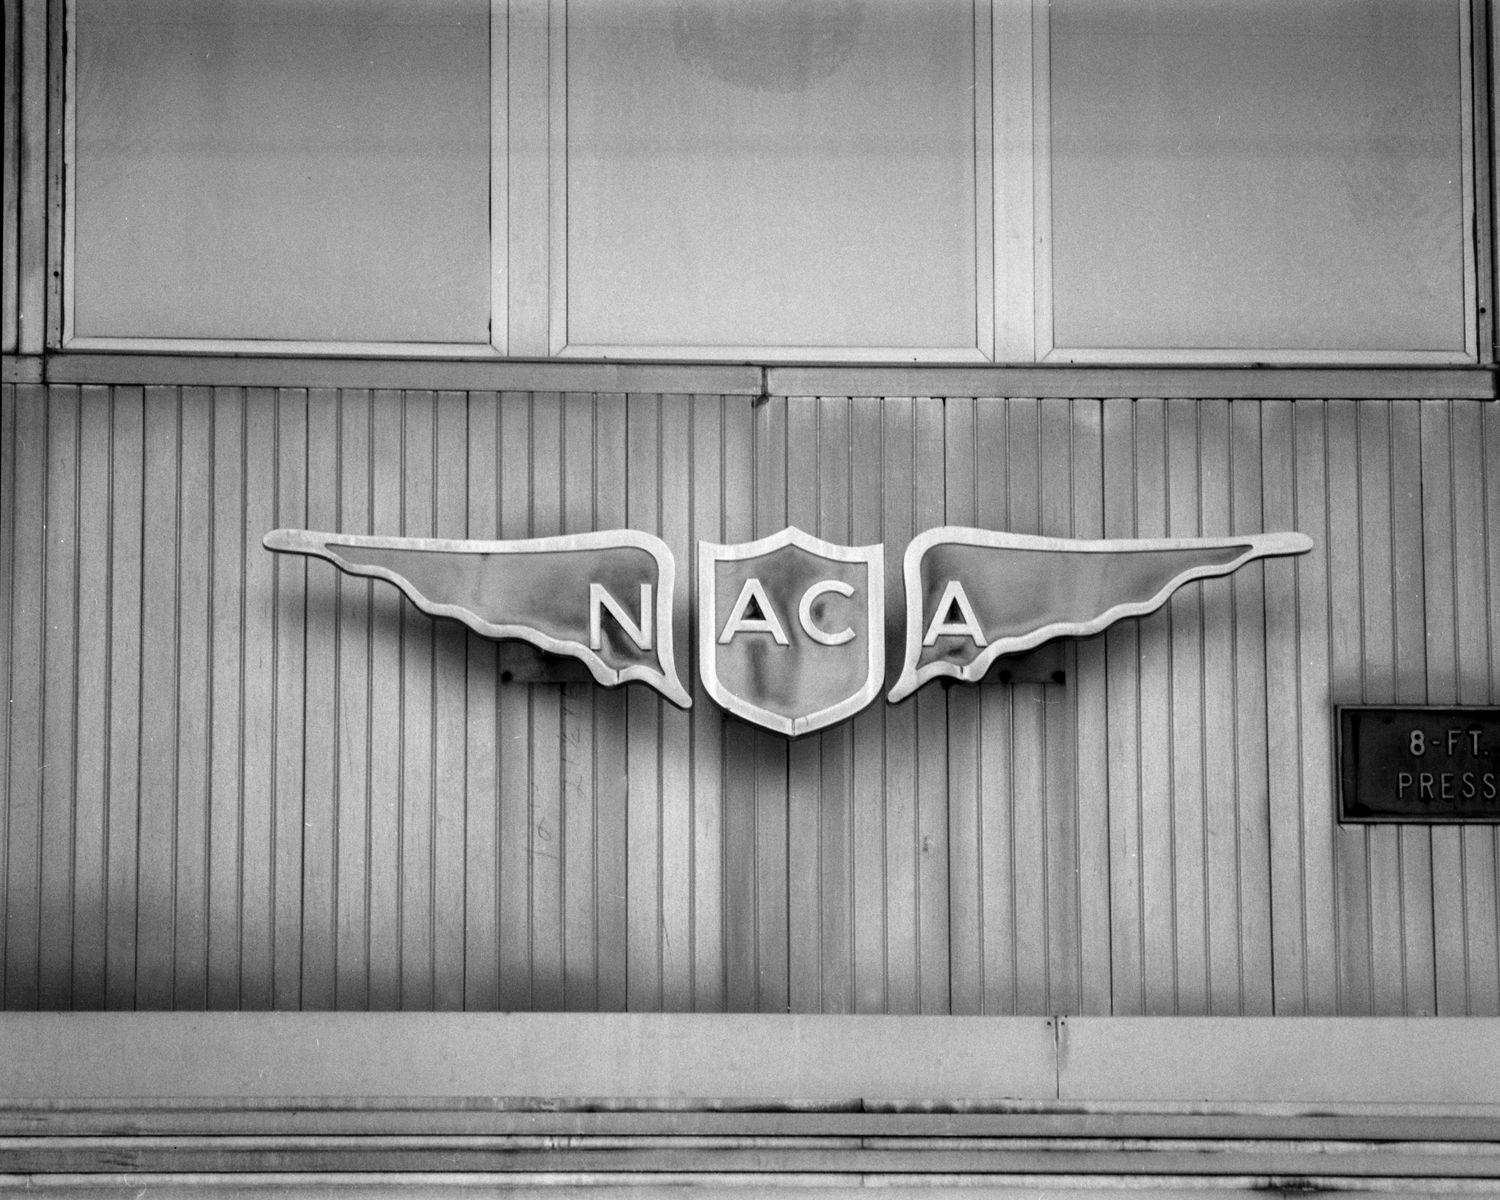 1950s NASA Logo - A Sign from NASA's Past Goes to National Air and Space Museum